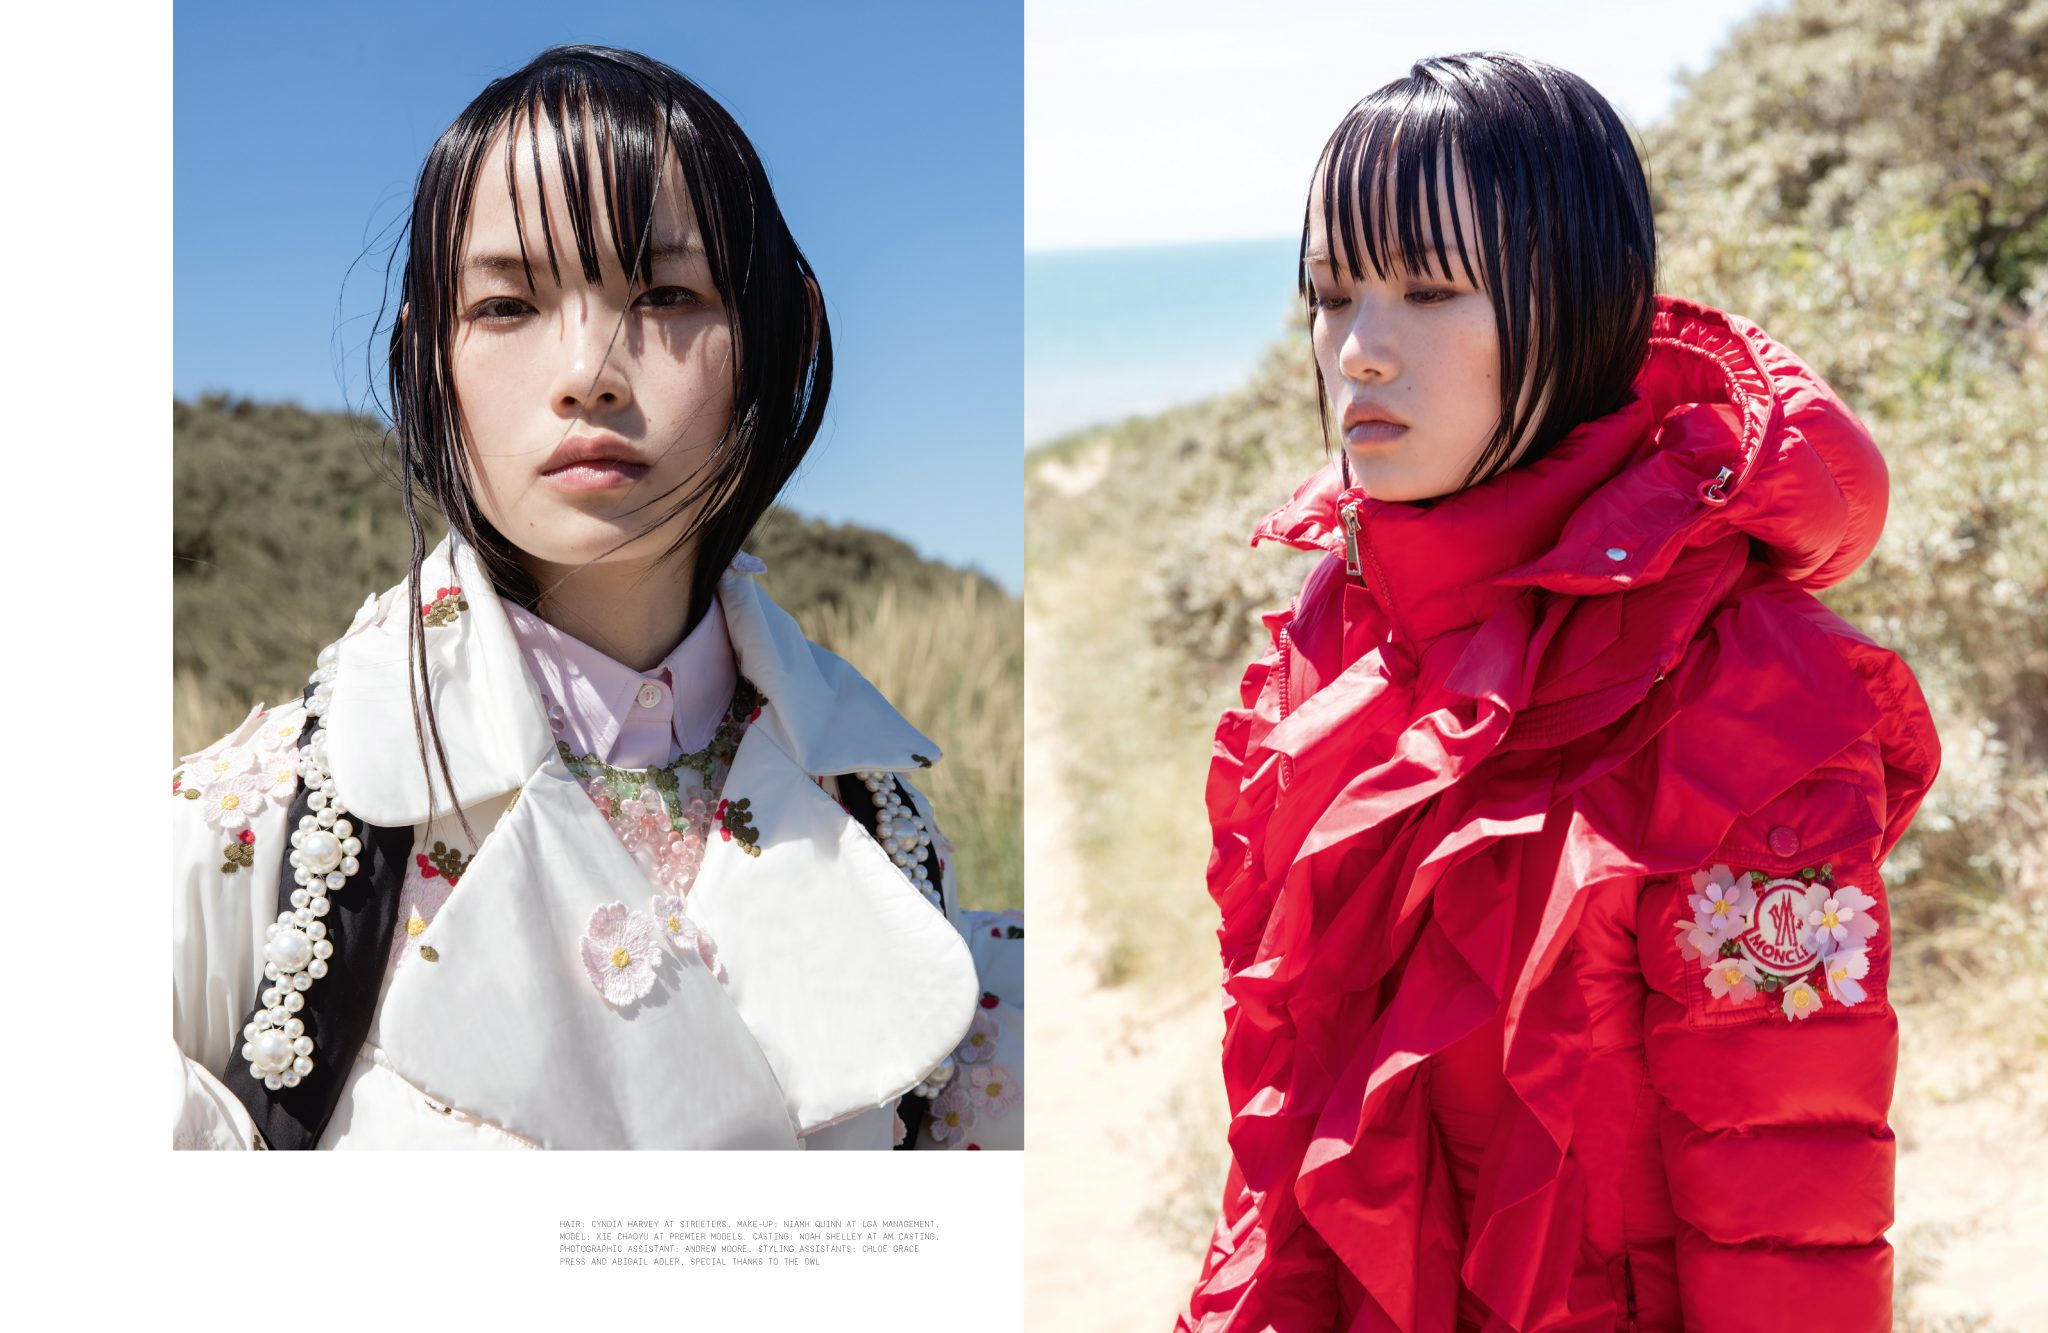  | Another magazine: Moncler | 4